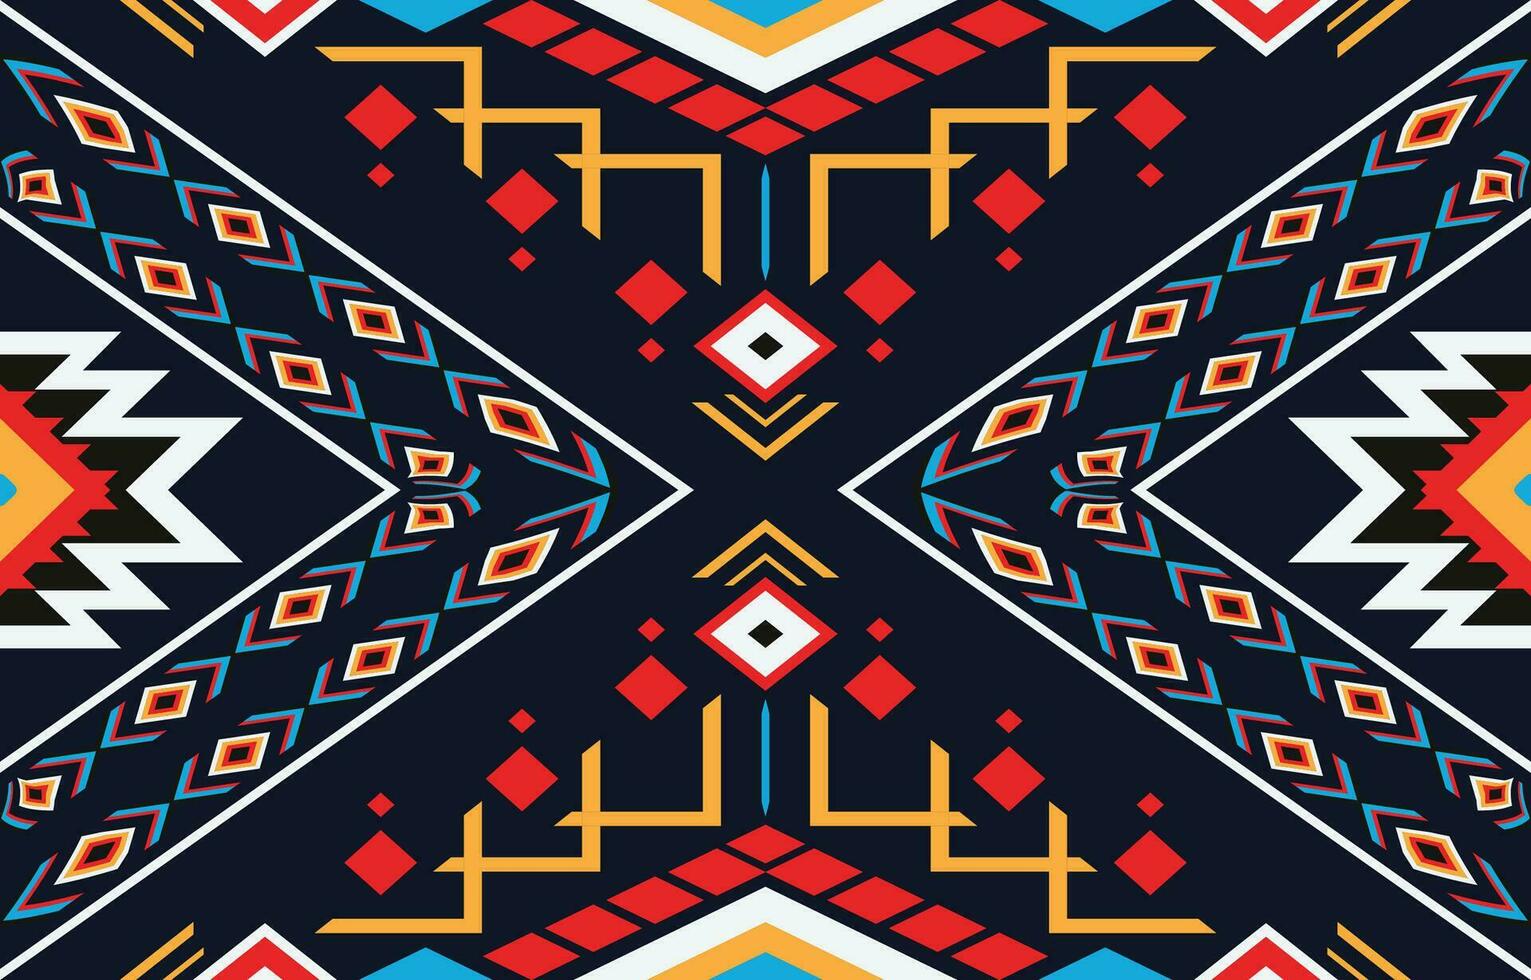 Geometric ethnic oriental pattern traditional Design for background,carpet,wallpaper,clothing,wrapping,Batik,fabric,Vector illustration embroidery style. vector